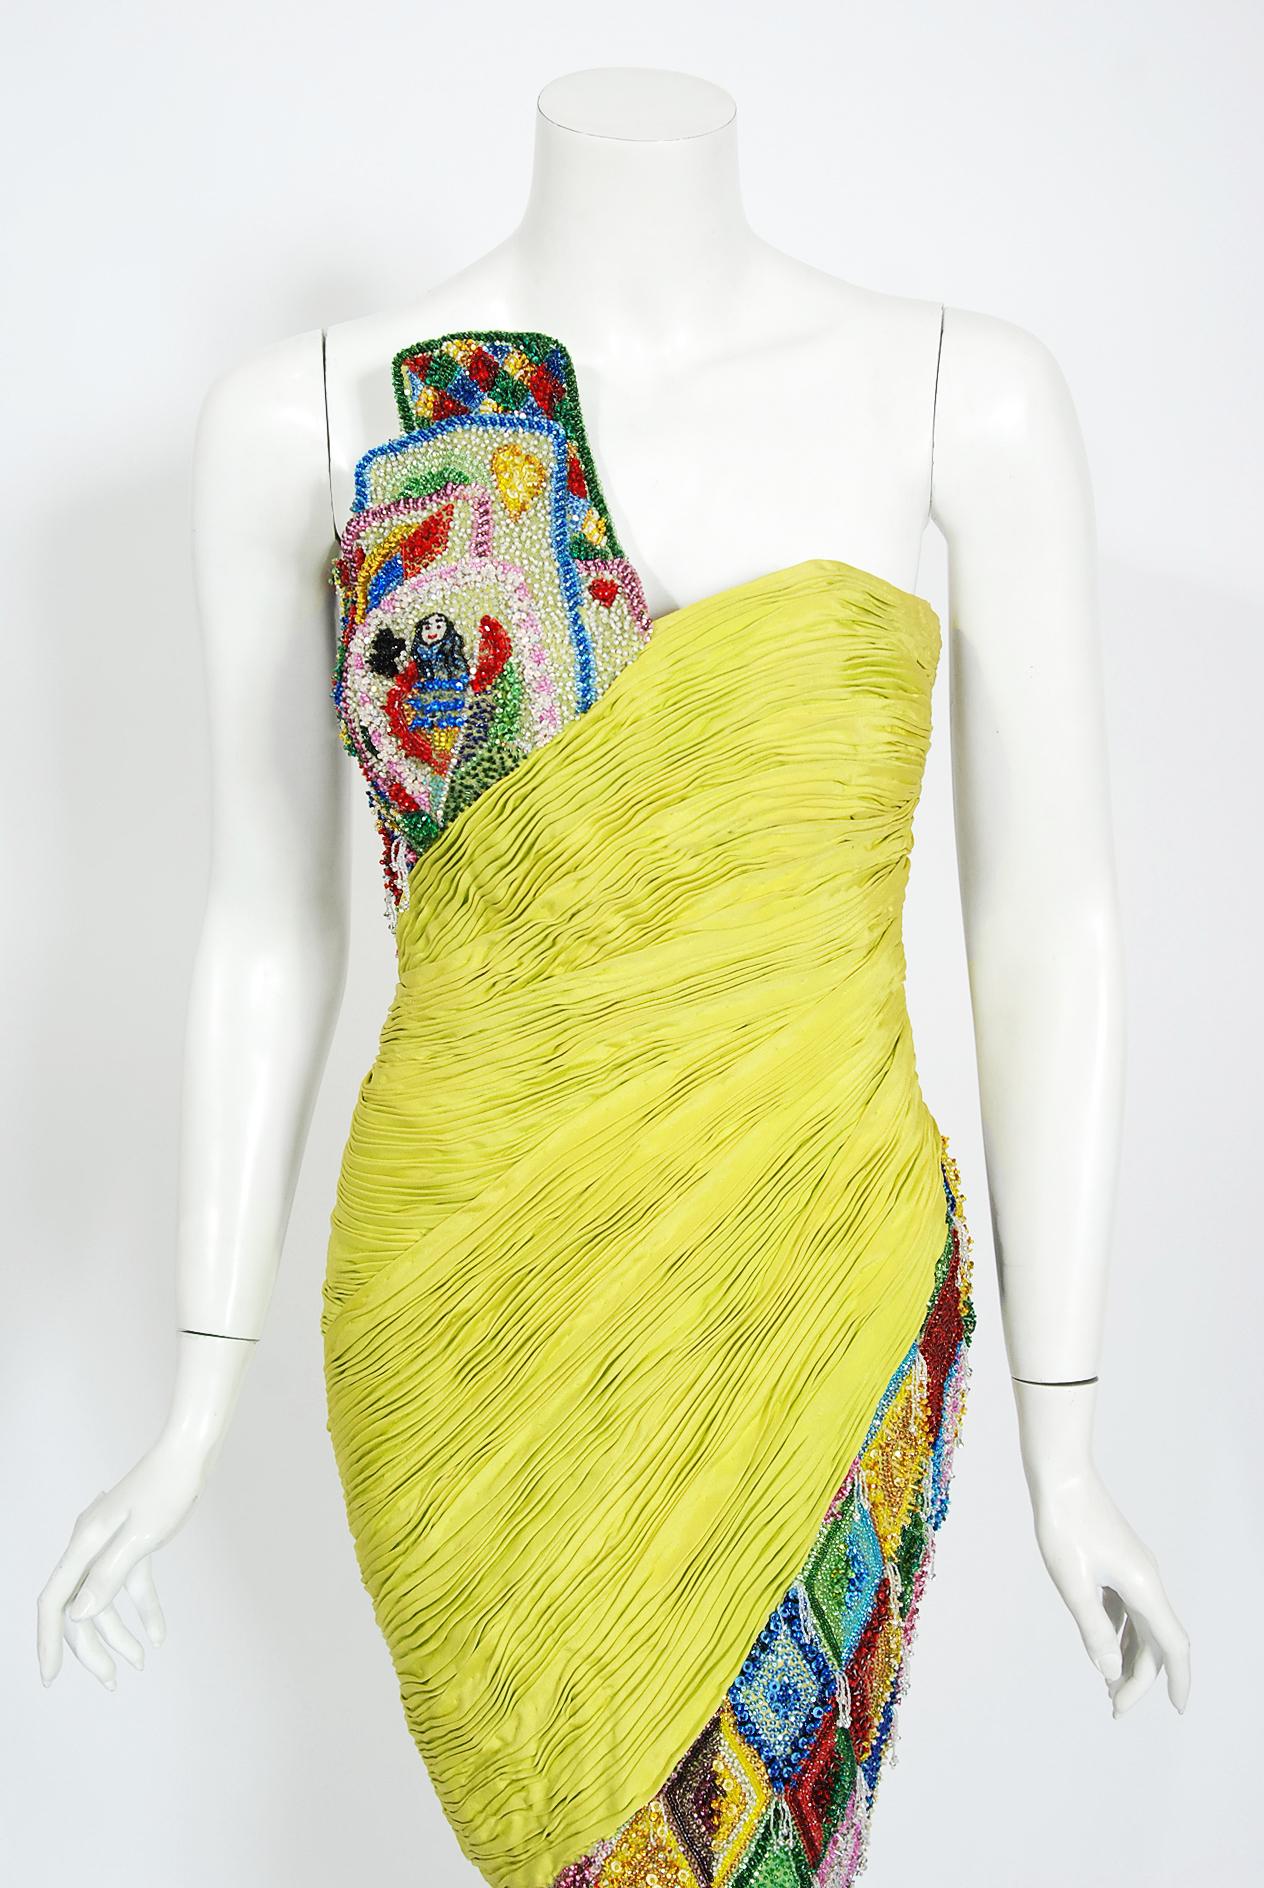 An exceptional and museum quality Gianni Versace multi-colored beaded mini dress dating back to his iconic Spring/Summer 1990 runway couture collection. This one-of-a-kind dress debuted in Paris and has been authenticated by their historical